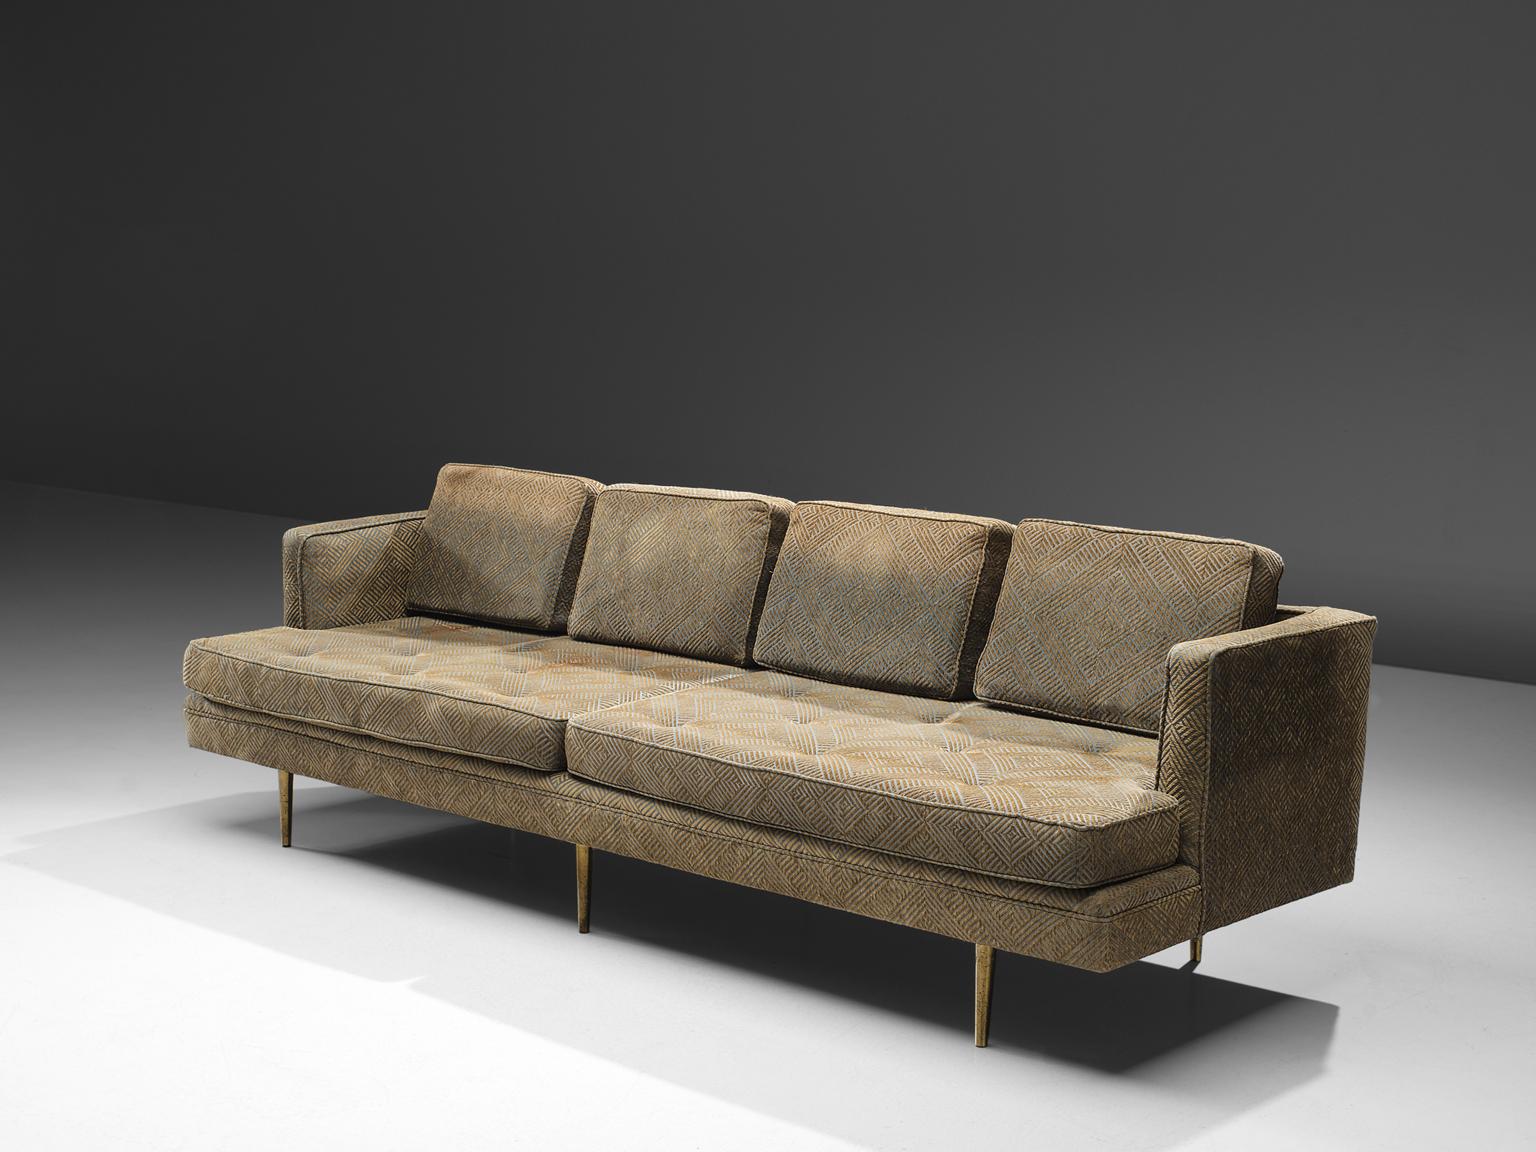 Edward Wormley for Dunbar, sofa 4907A, grey, champagne to beige colored velvet, brass, United States, 1950s. 

The style of the sofa is simple and elegant as it bears features of classic design combined with minimalist, sober influences. In the